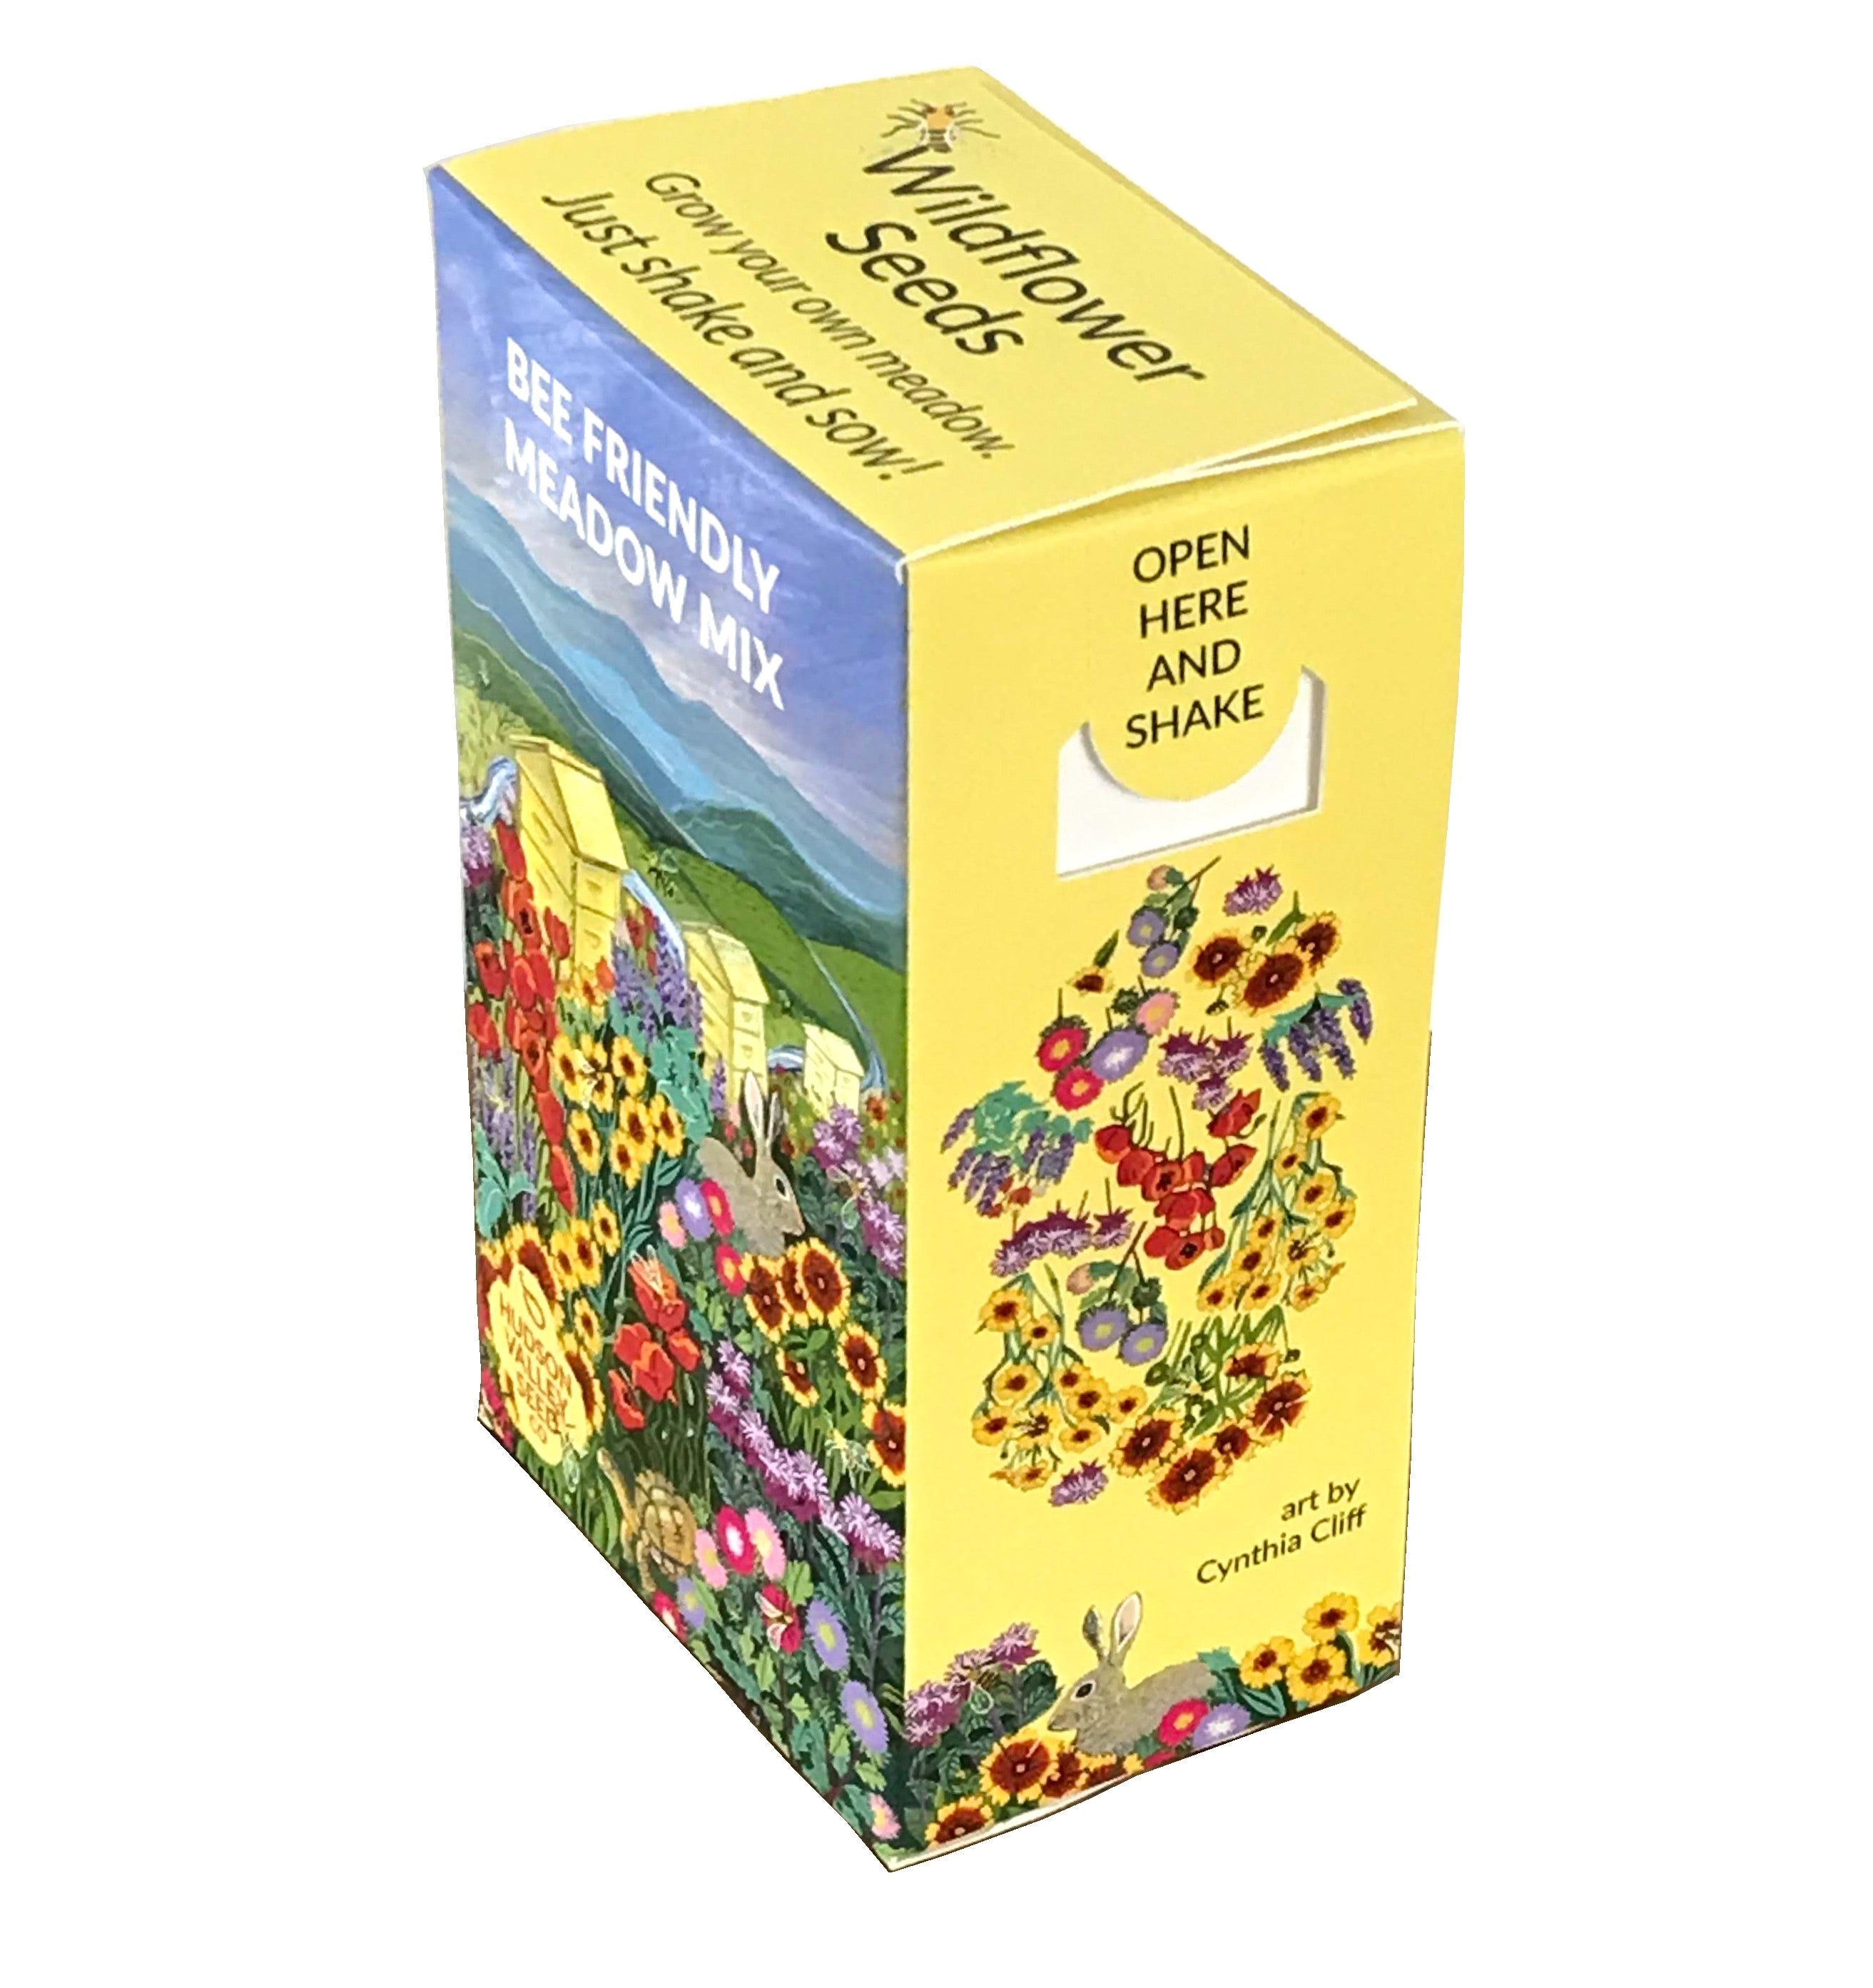 Perennials Bee Friendly Meadow Mix Seed Shaker